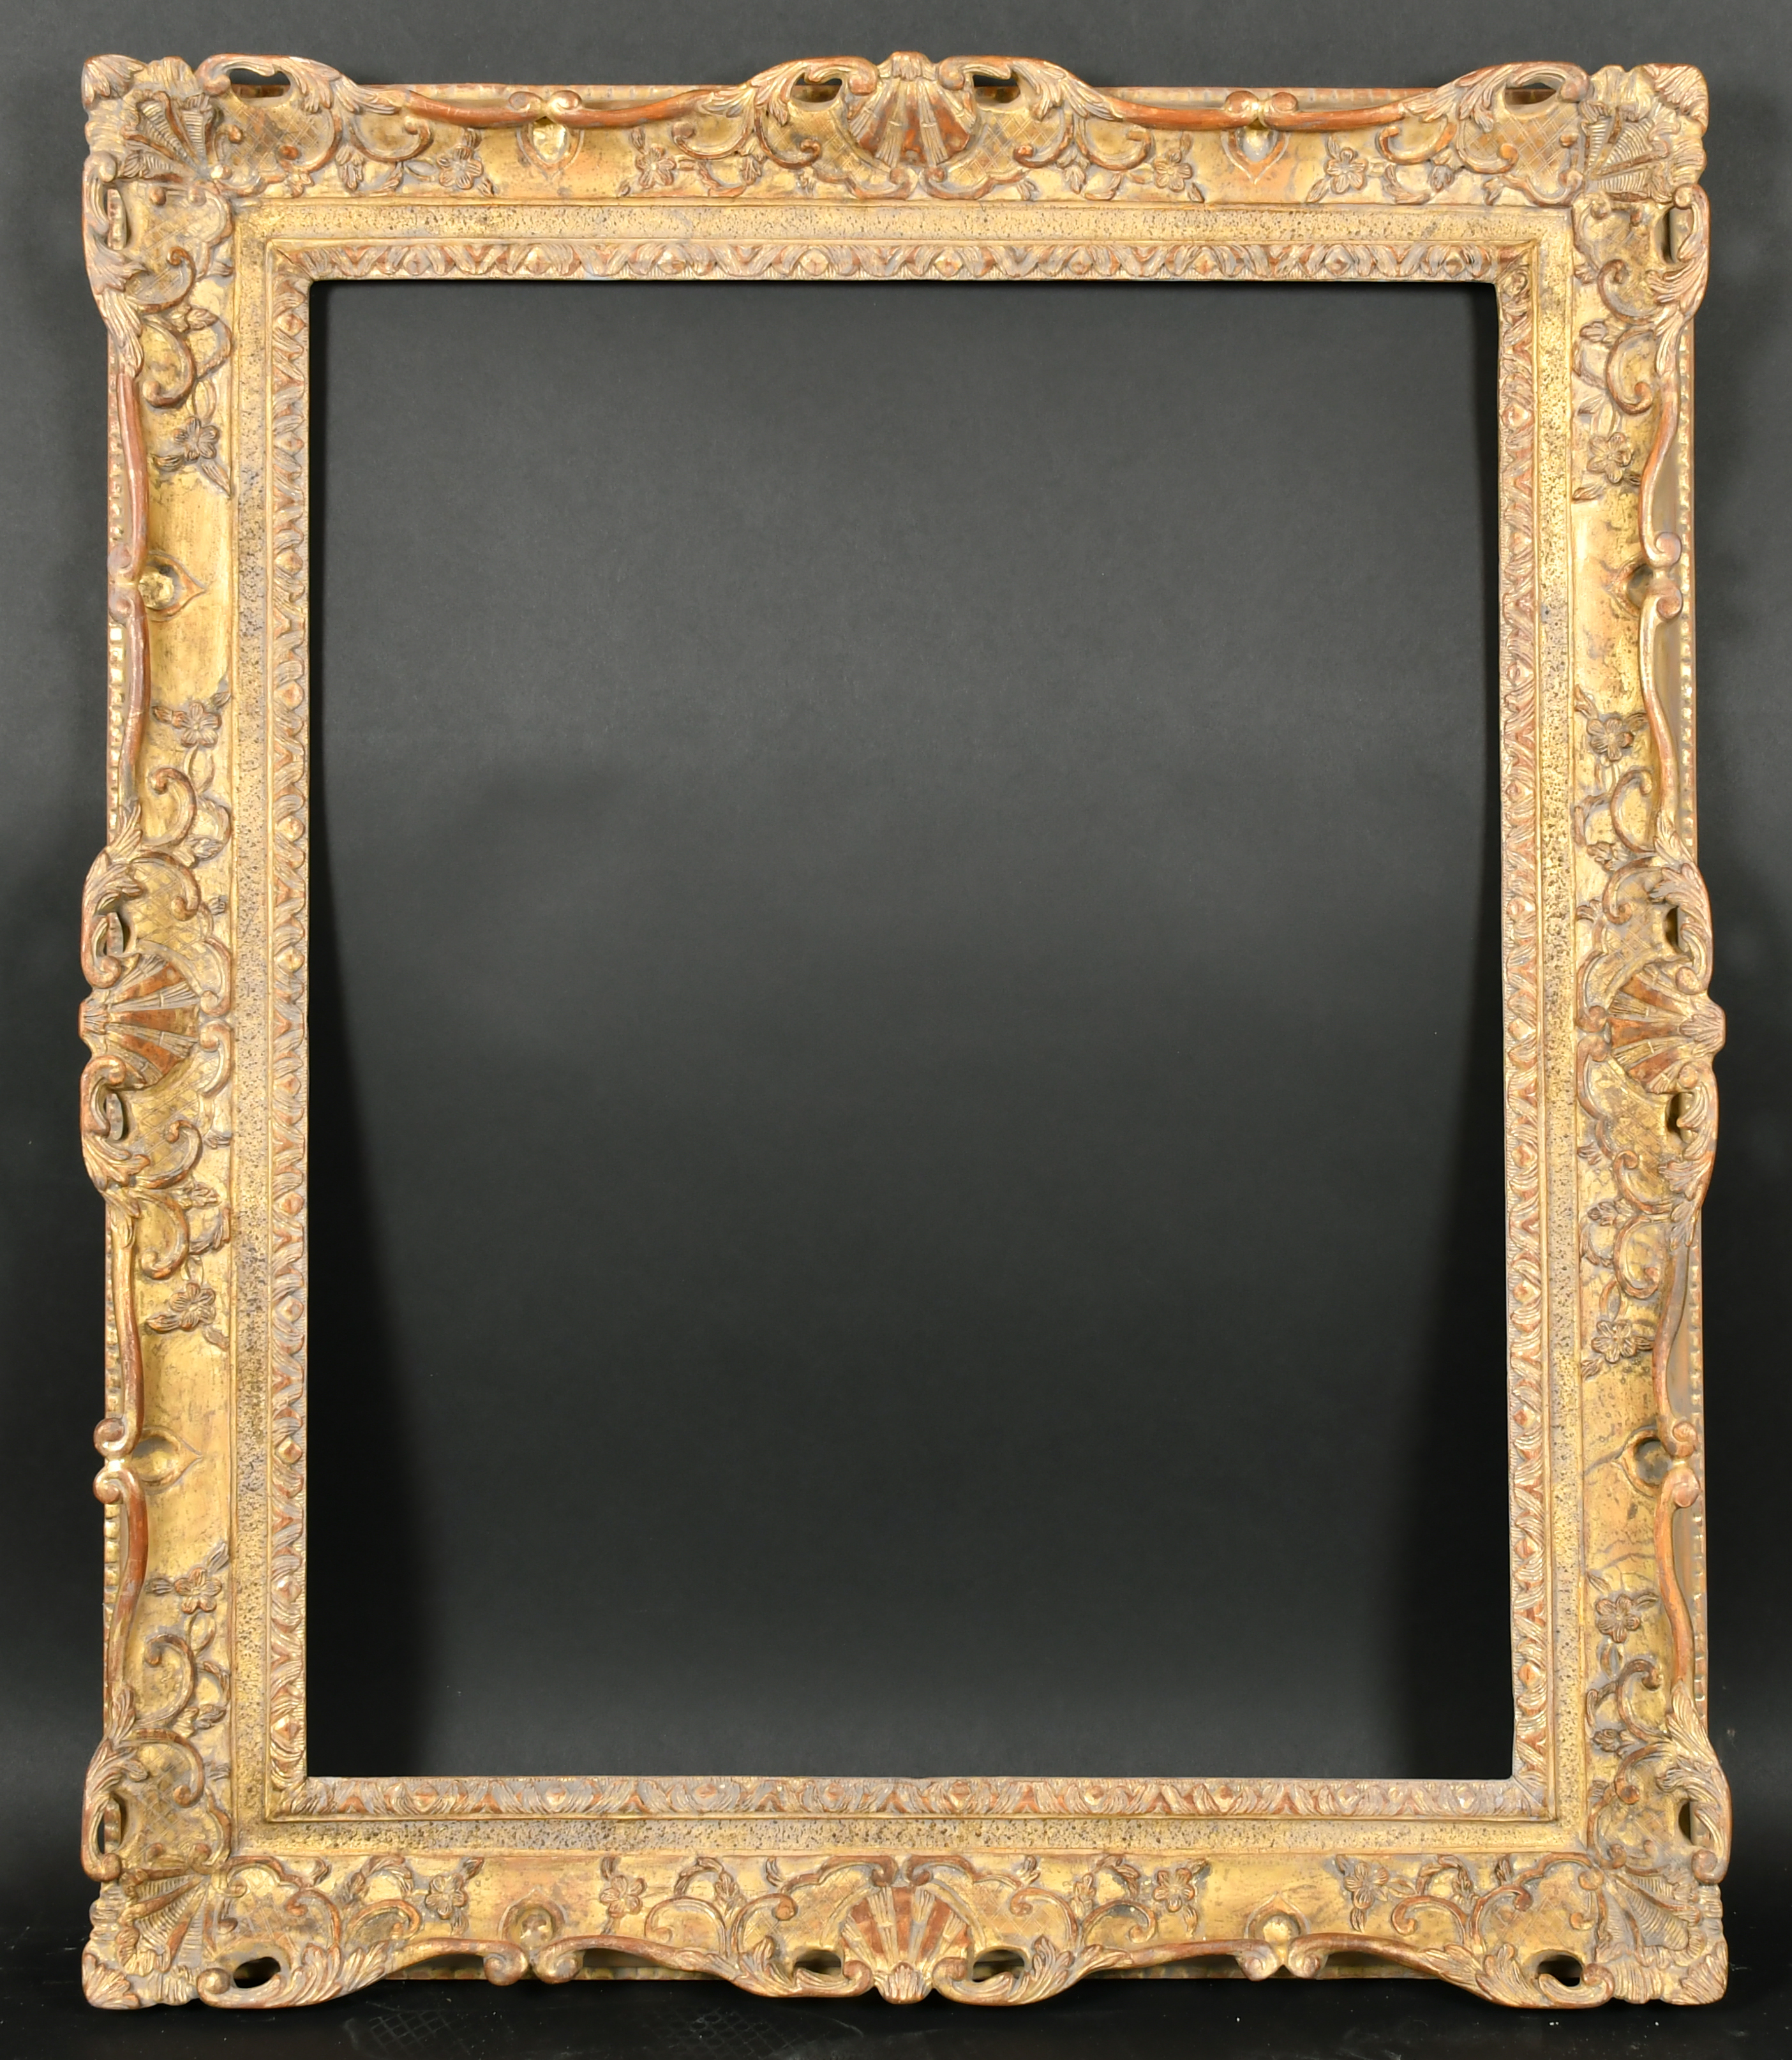 18th Century French School. A Fine Louis XV Carved Giltwood Frame, with swept and pierced centres - Image 2 of 3